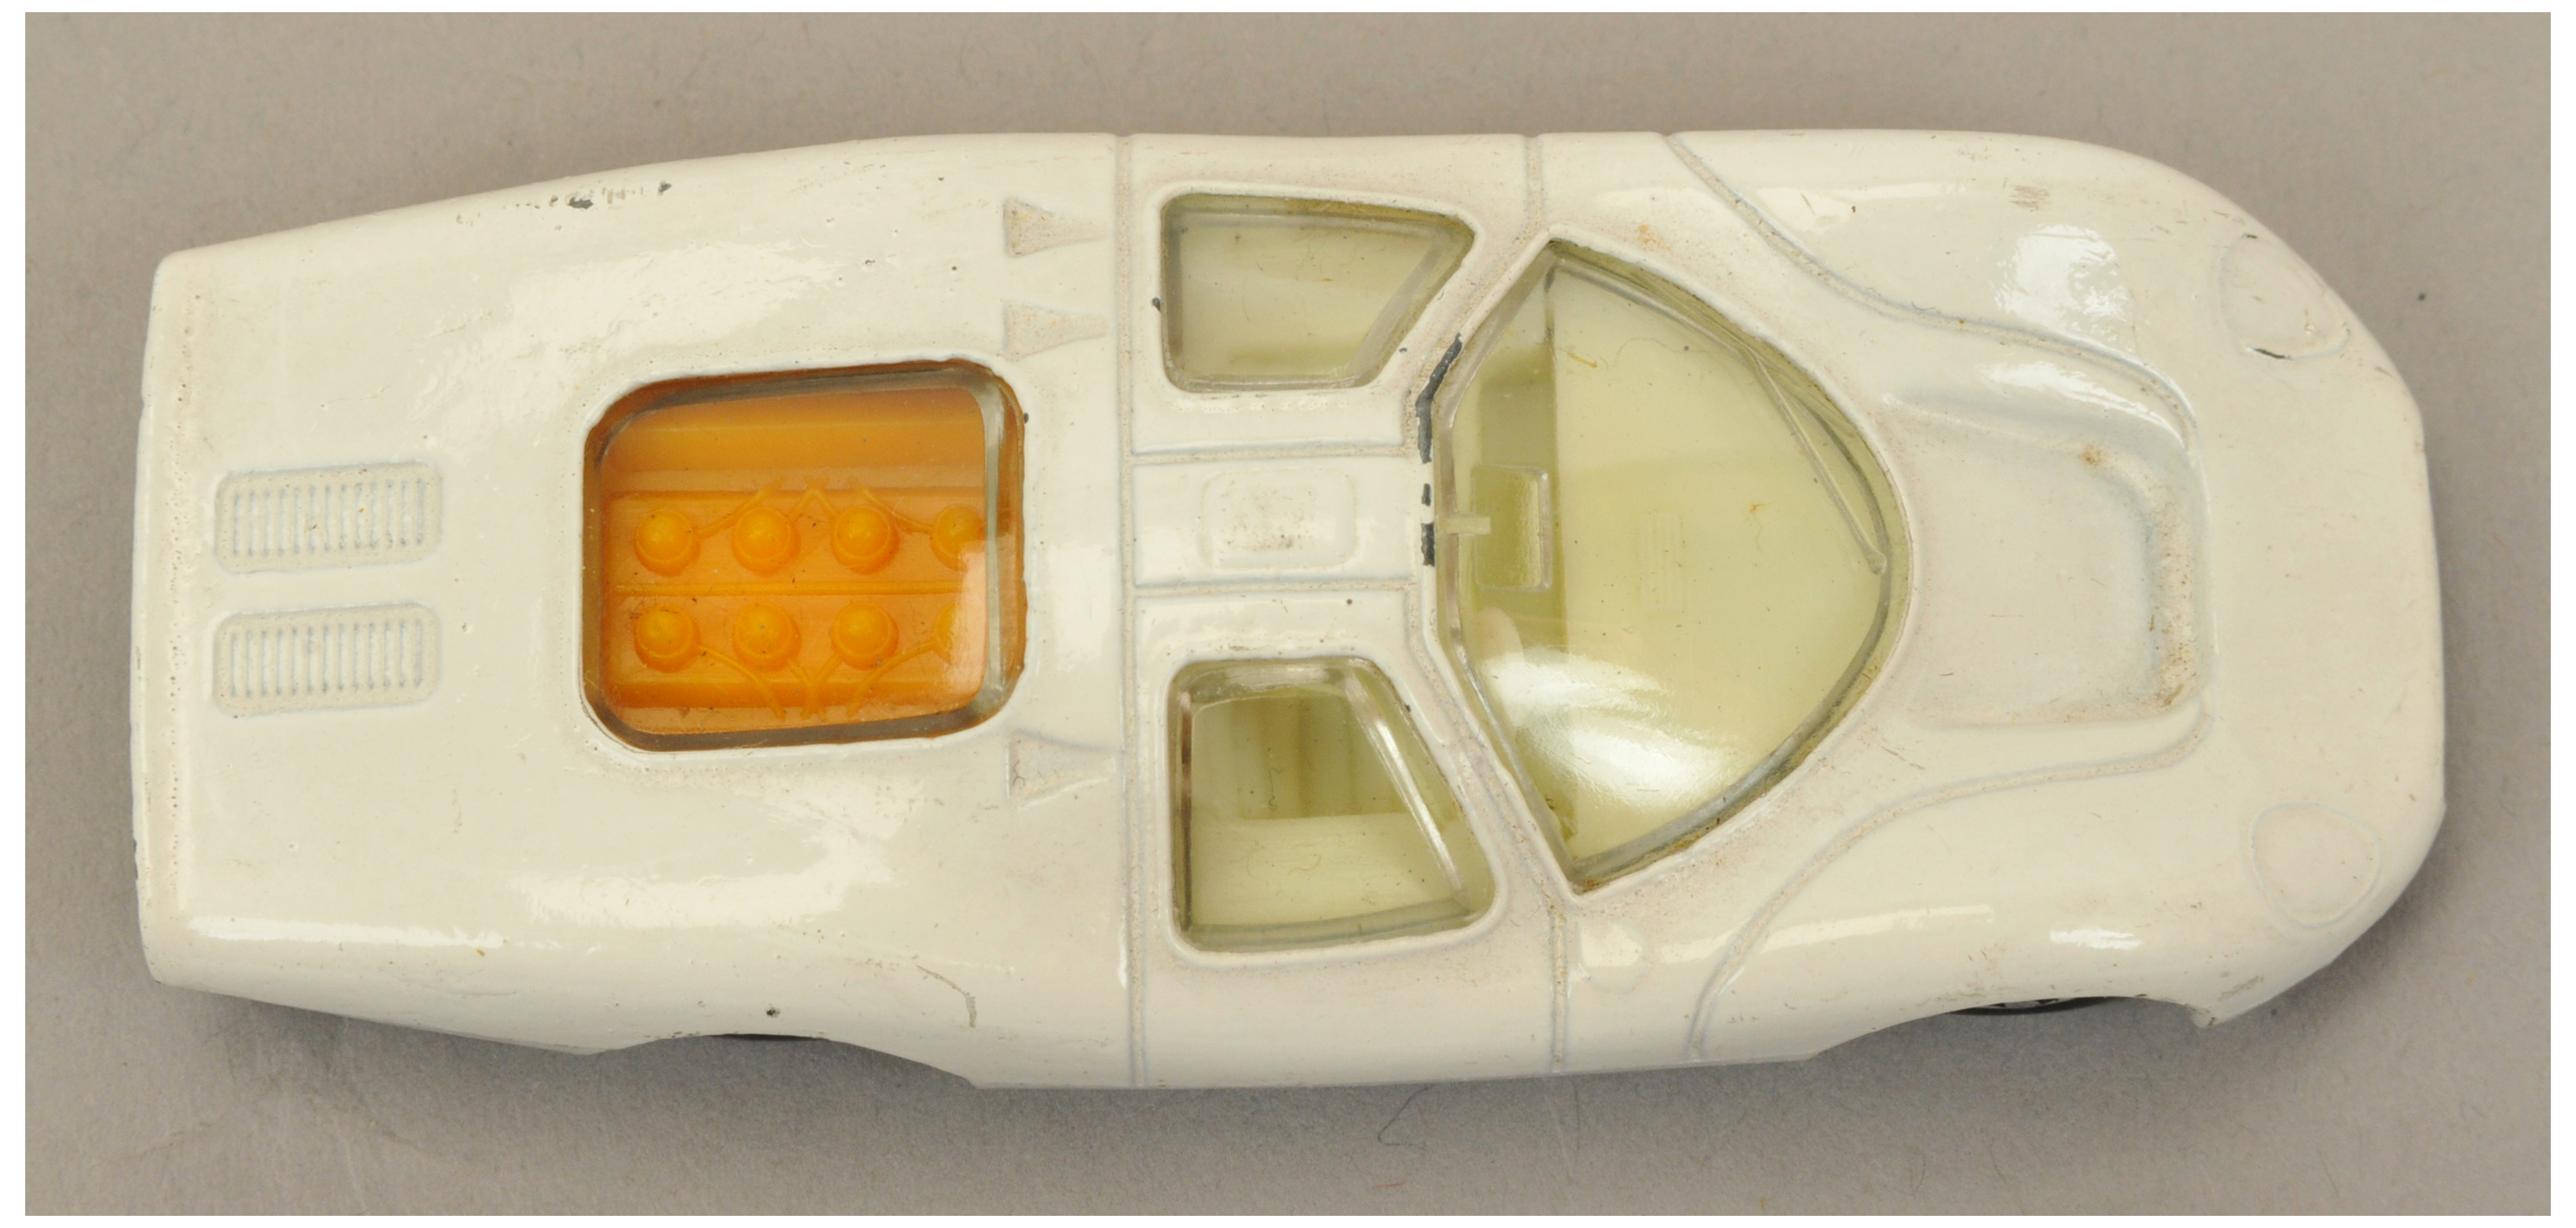 Matchbox Superfast 45a Ford Group 6 factory Pre-production colour trial - white body, clear windo... - Image 4 of 4